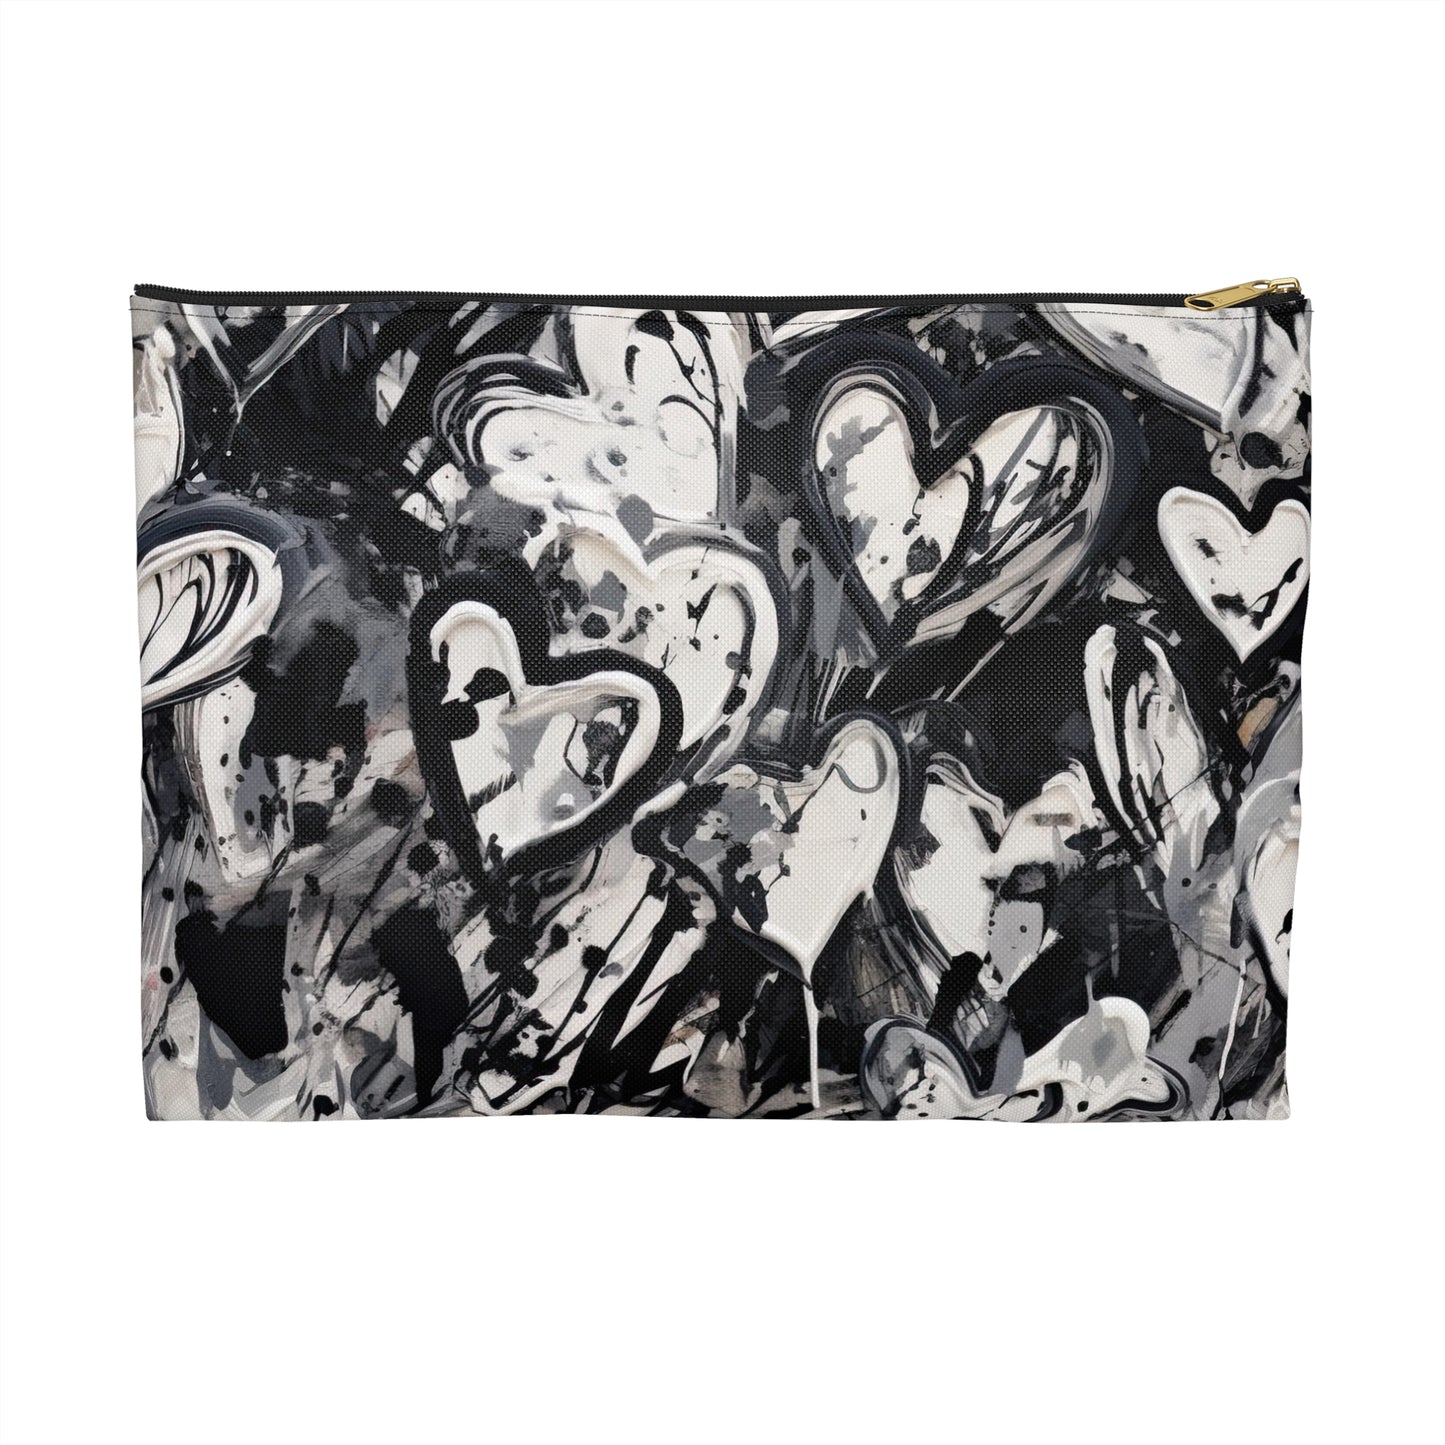 Black and White Painted Hearts -  Accessory Pouch / Makeup Case / Travel Pouch / Pencil Case / Art Case